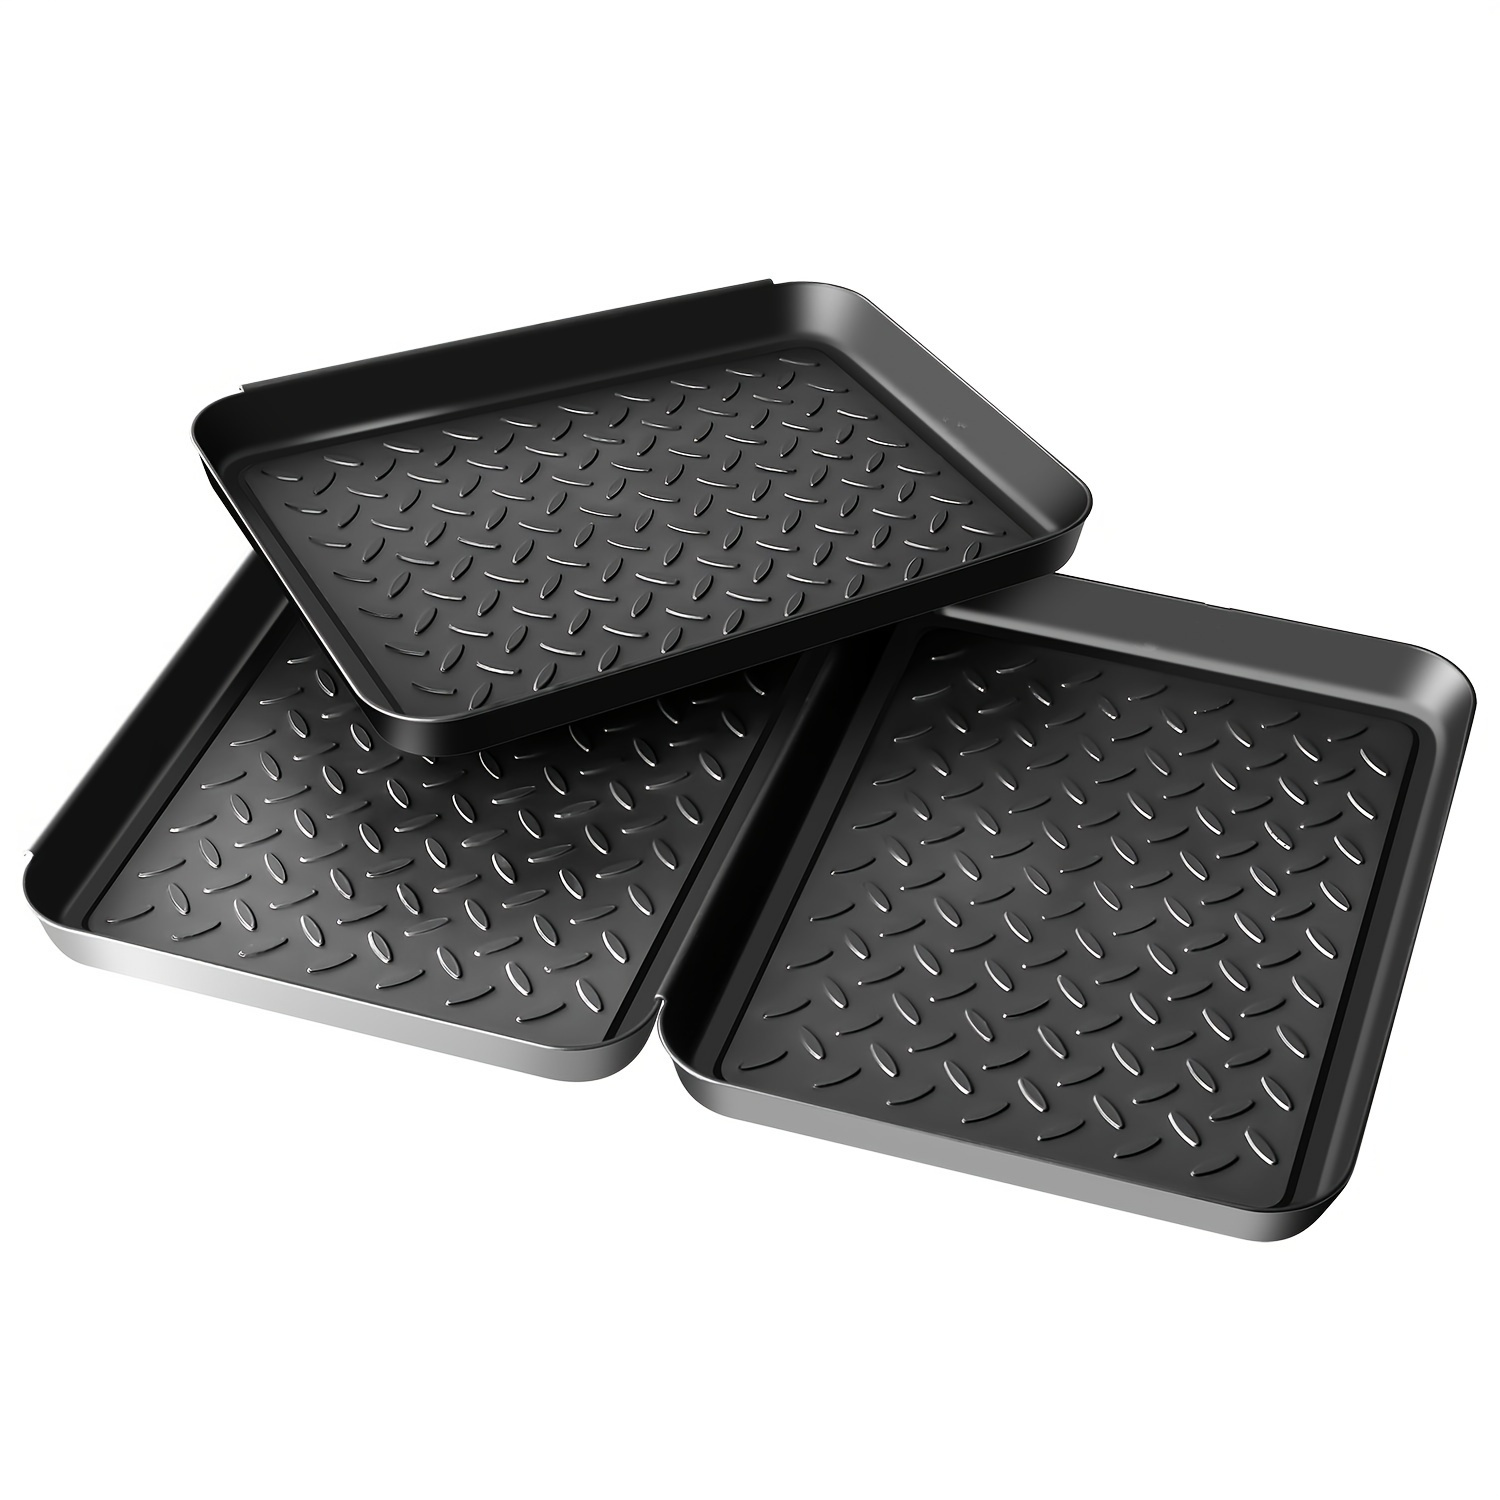 Boot Tray For Entryway Indoor, 2 Pack Plastic Small Shoe Mat Tray, Narrow  Boot Tray For Pet Food, Plant Drip, Mudroom, Under Sink, Garden, 13.7*10.6 I